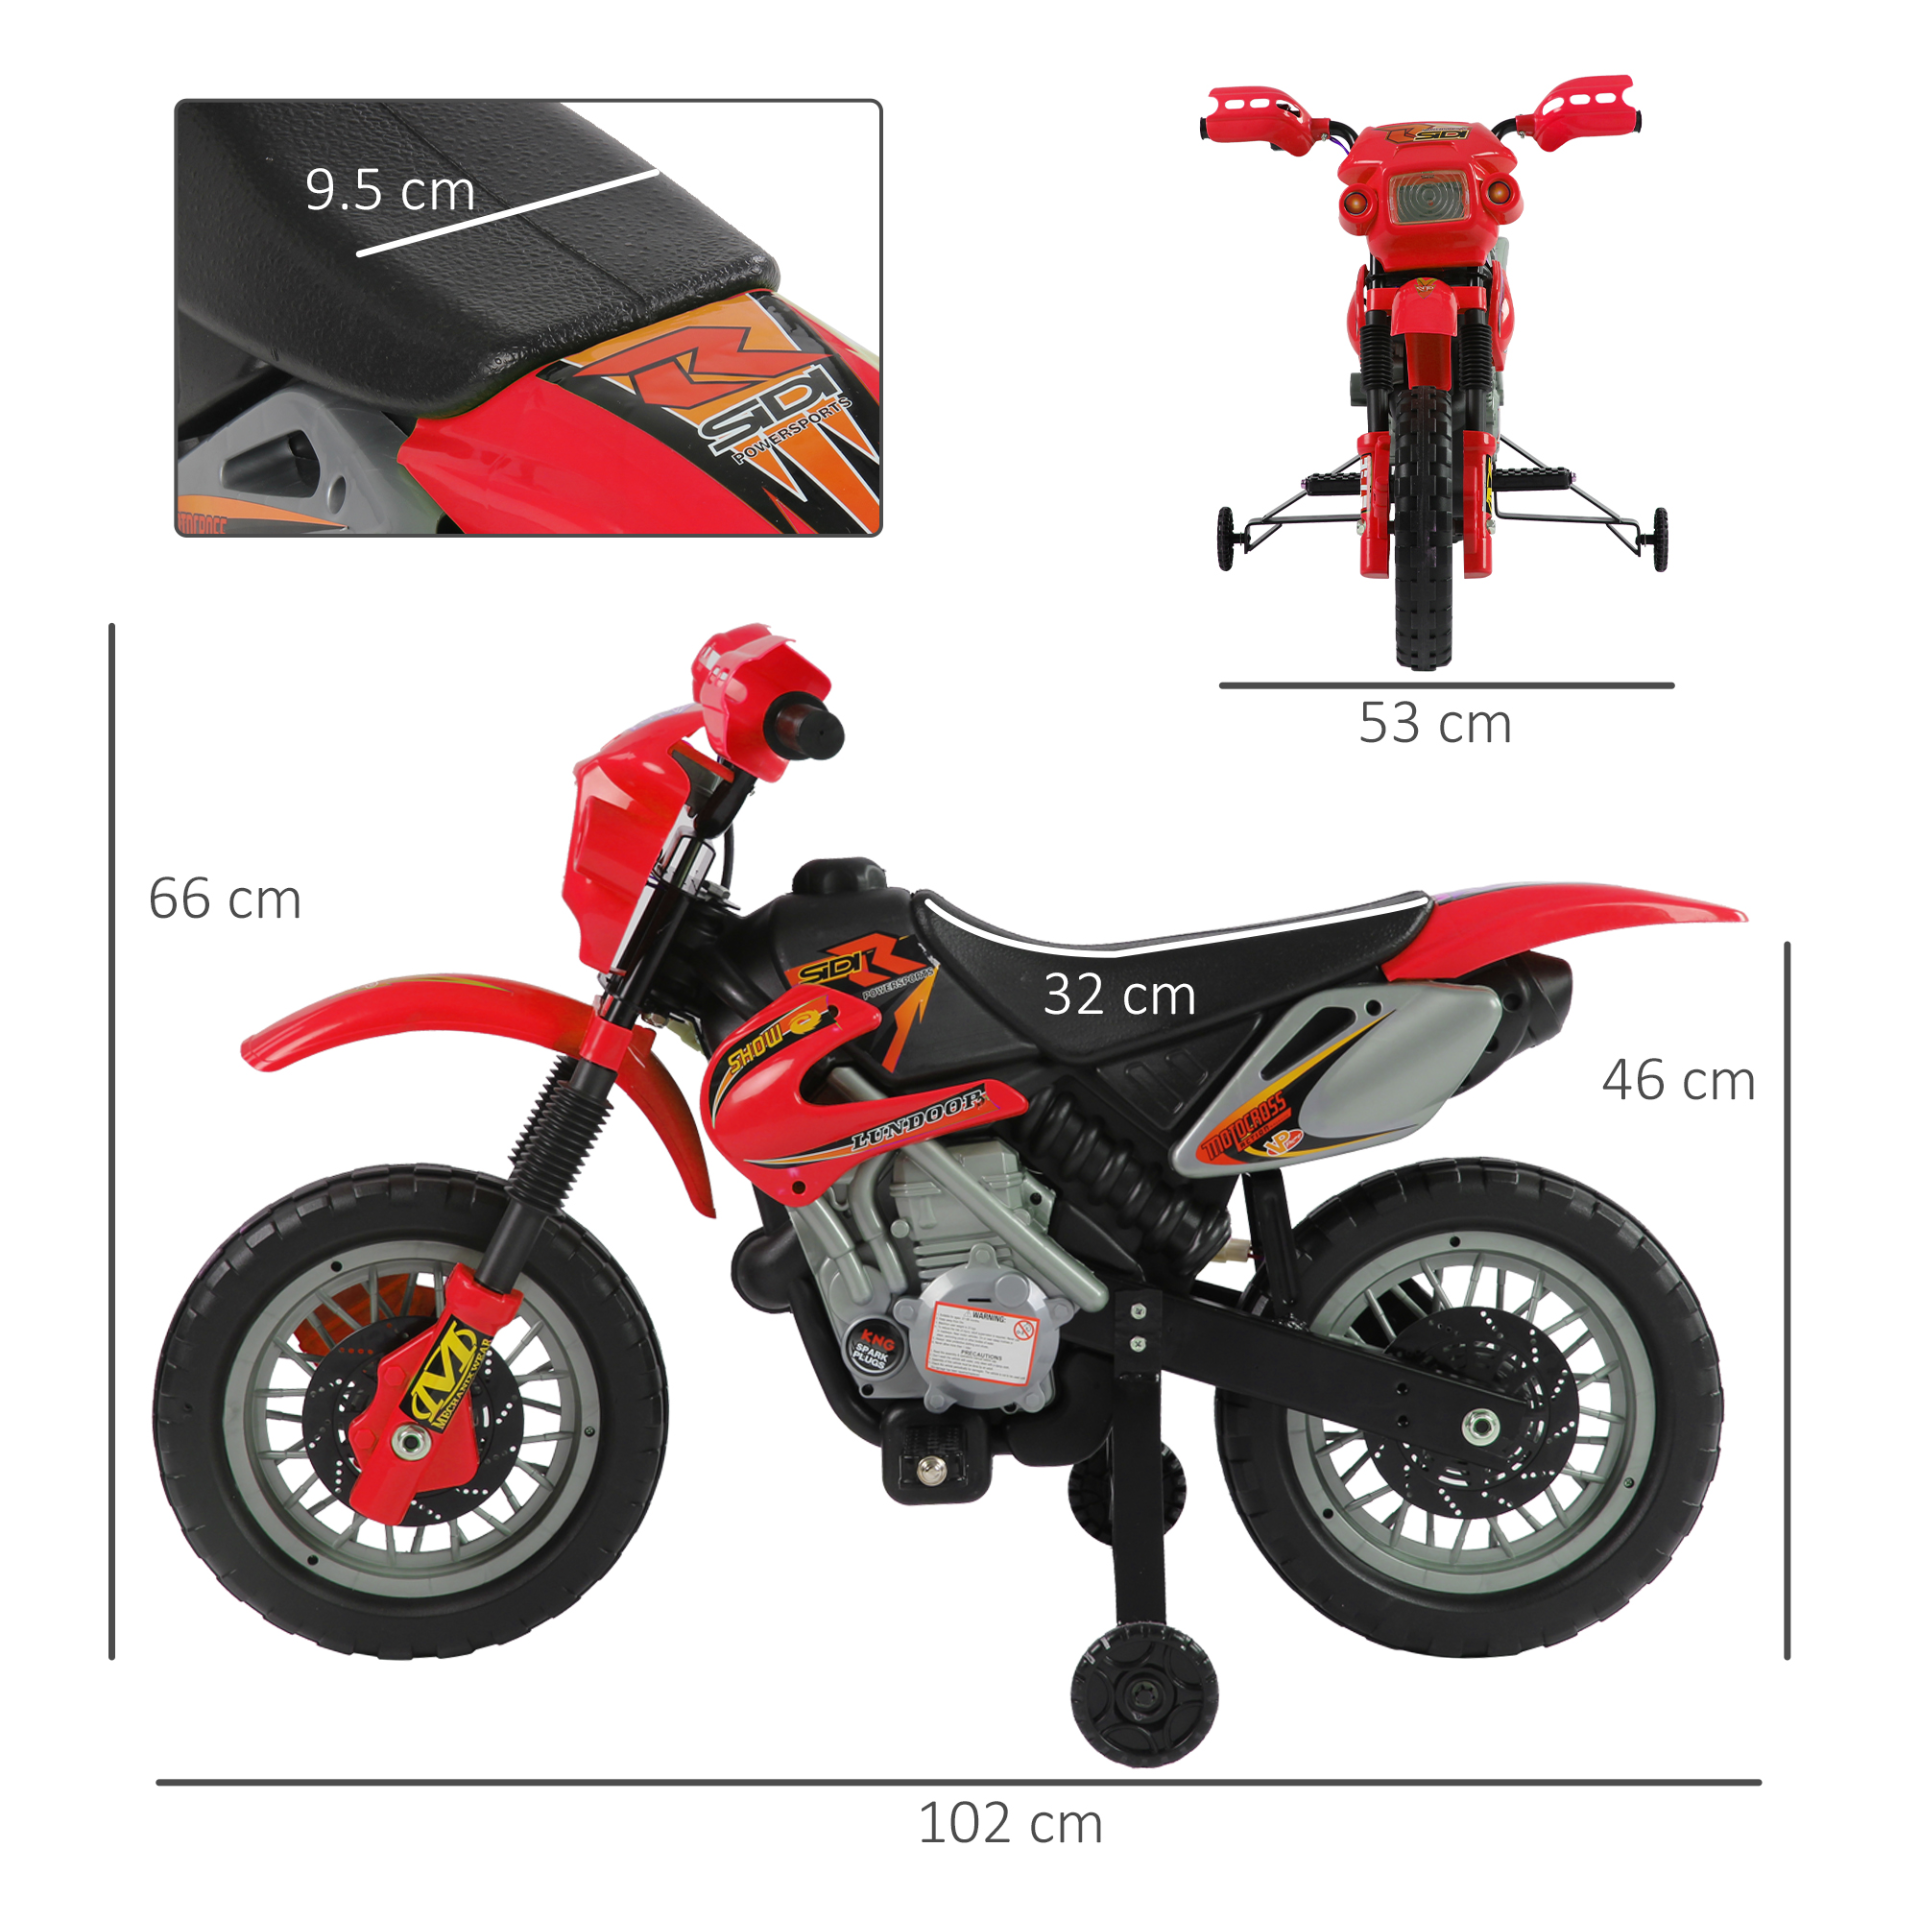 HOMCOM 6V Kids Child Electric Motorbike Ride on Motorcycle Scooter Children Toy Gift for 3-6 Years (Red)